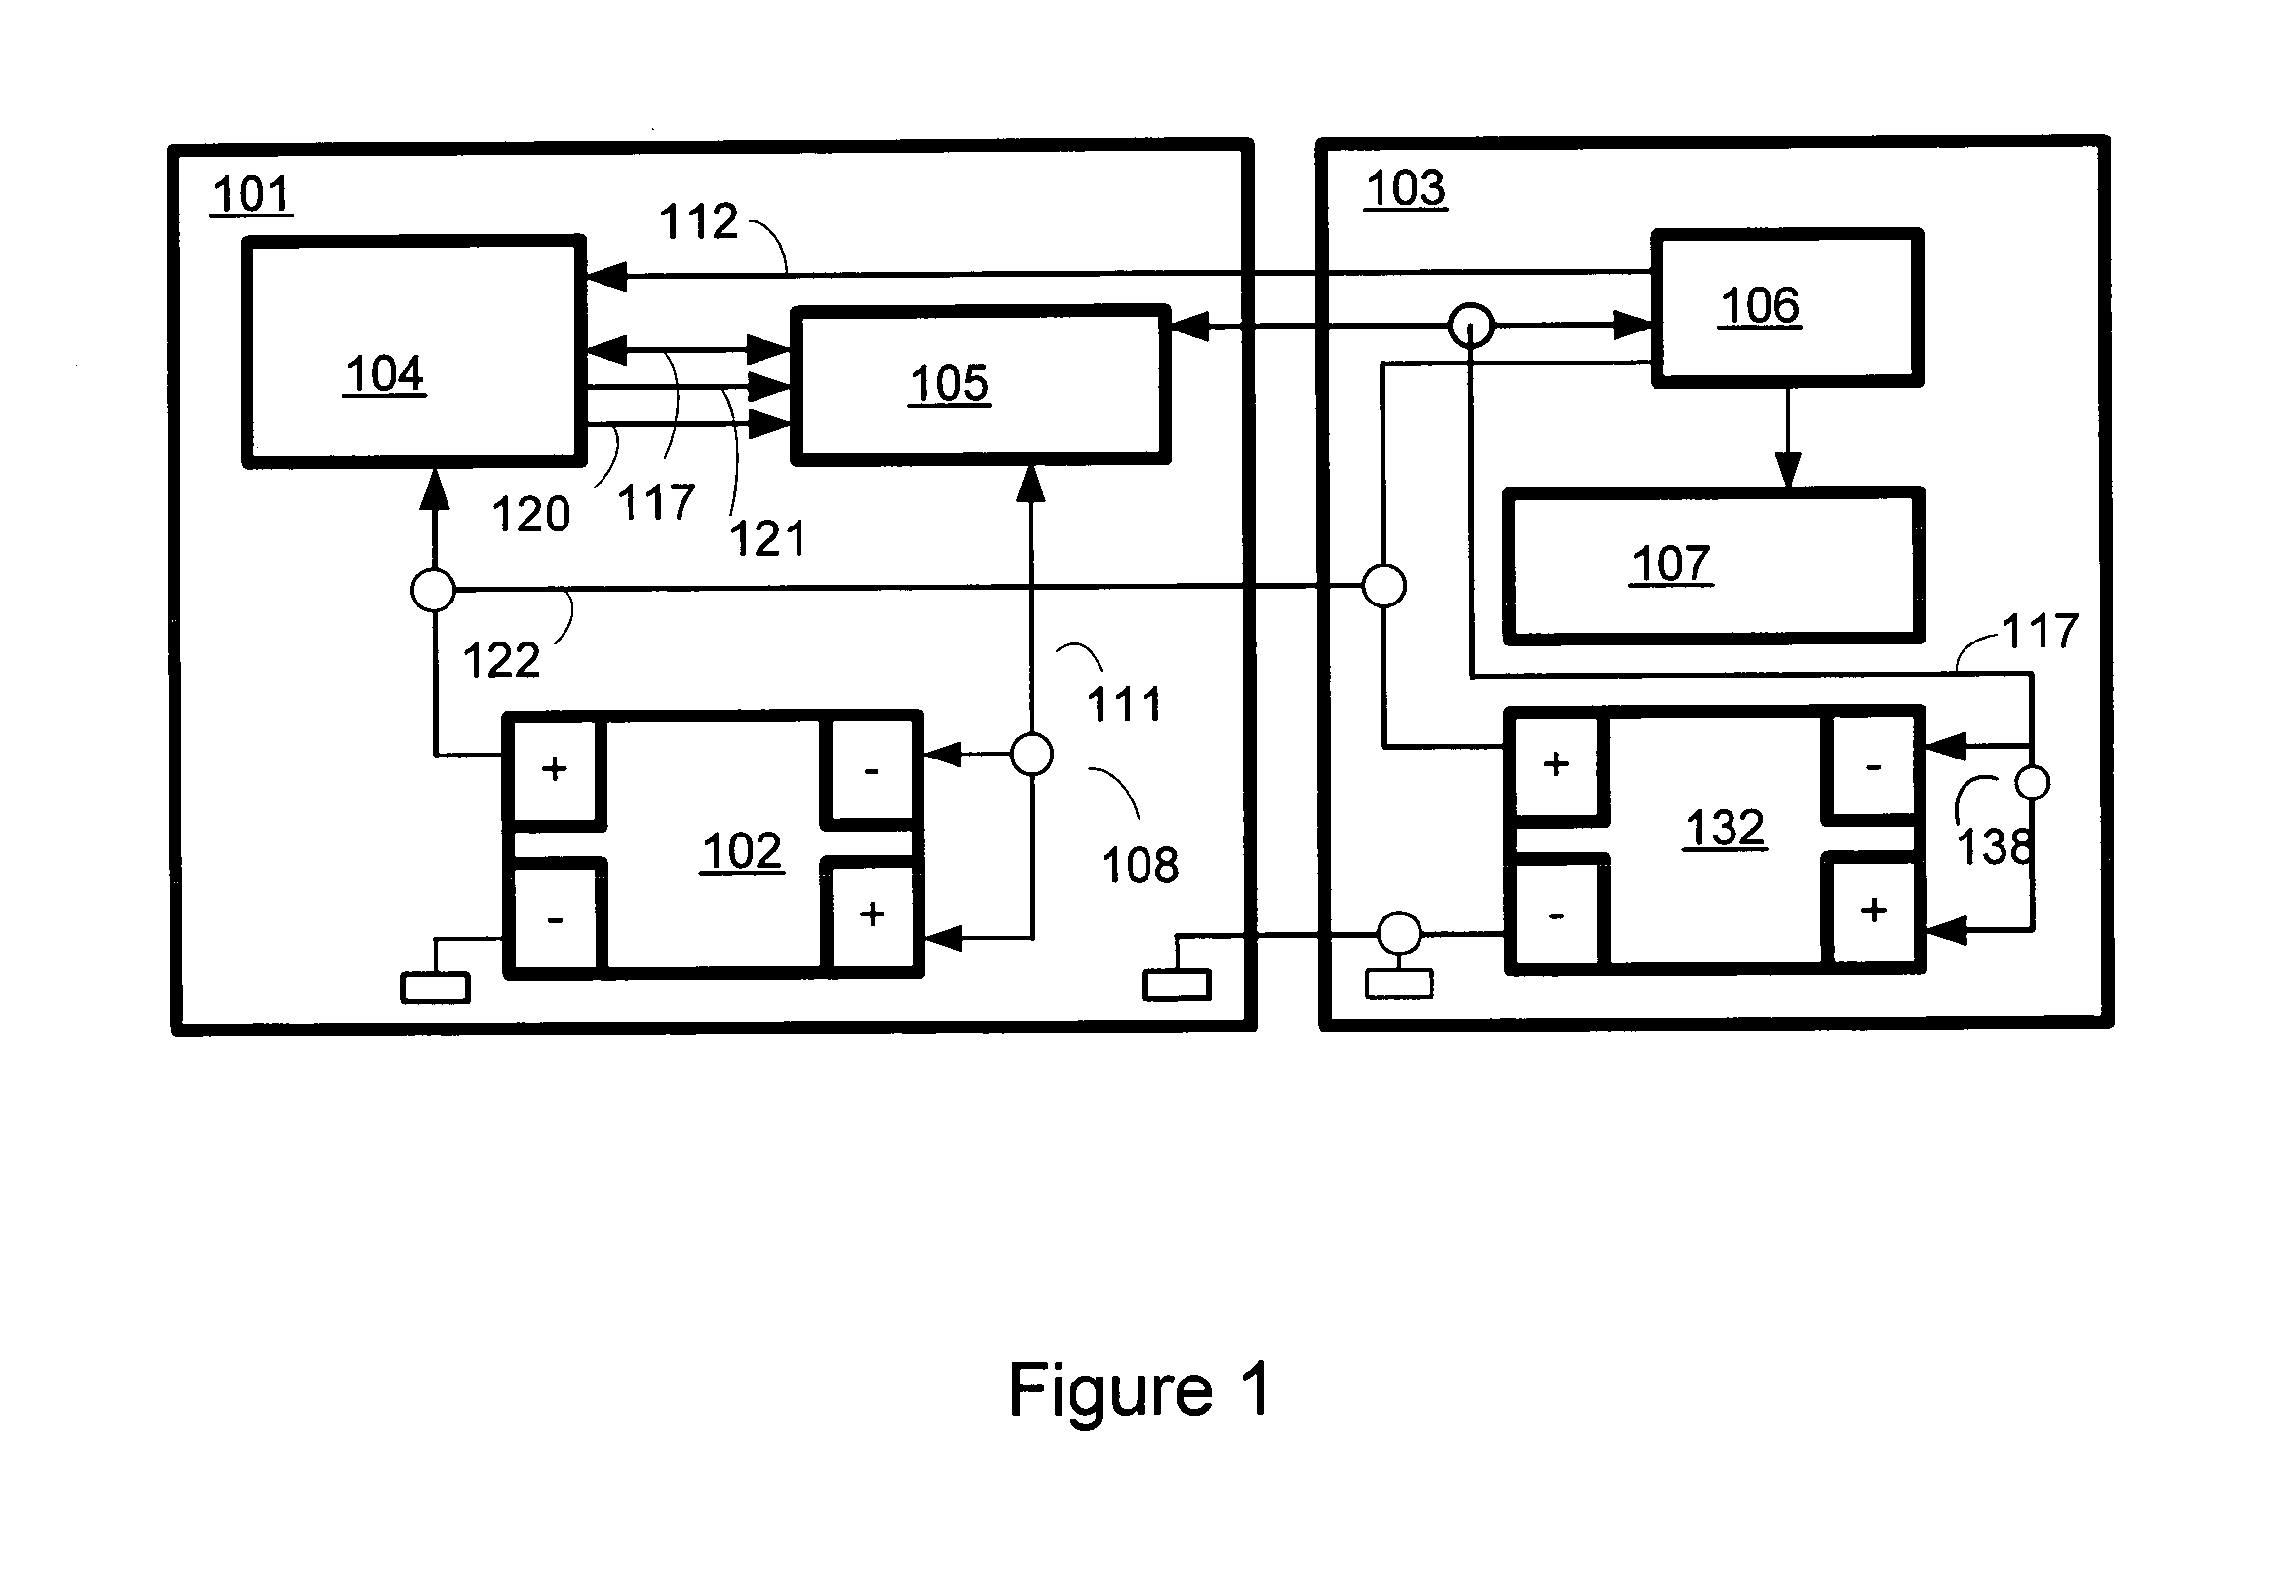 Battery determination system for battery-powered devices